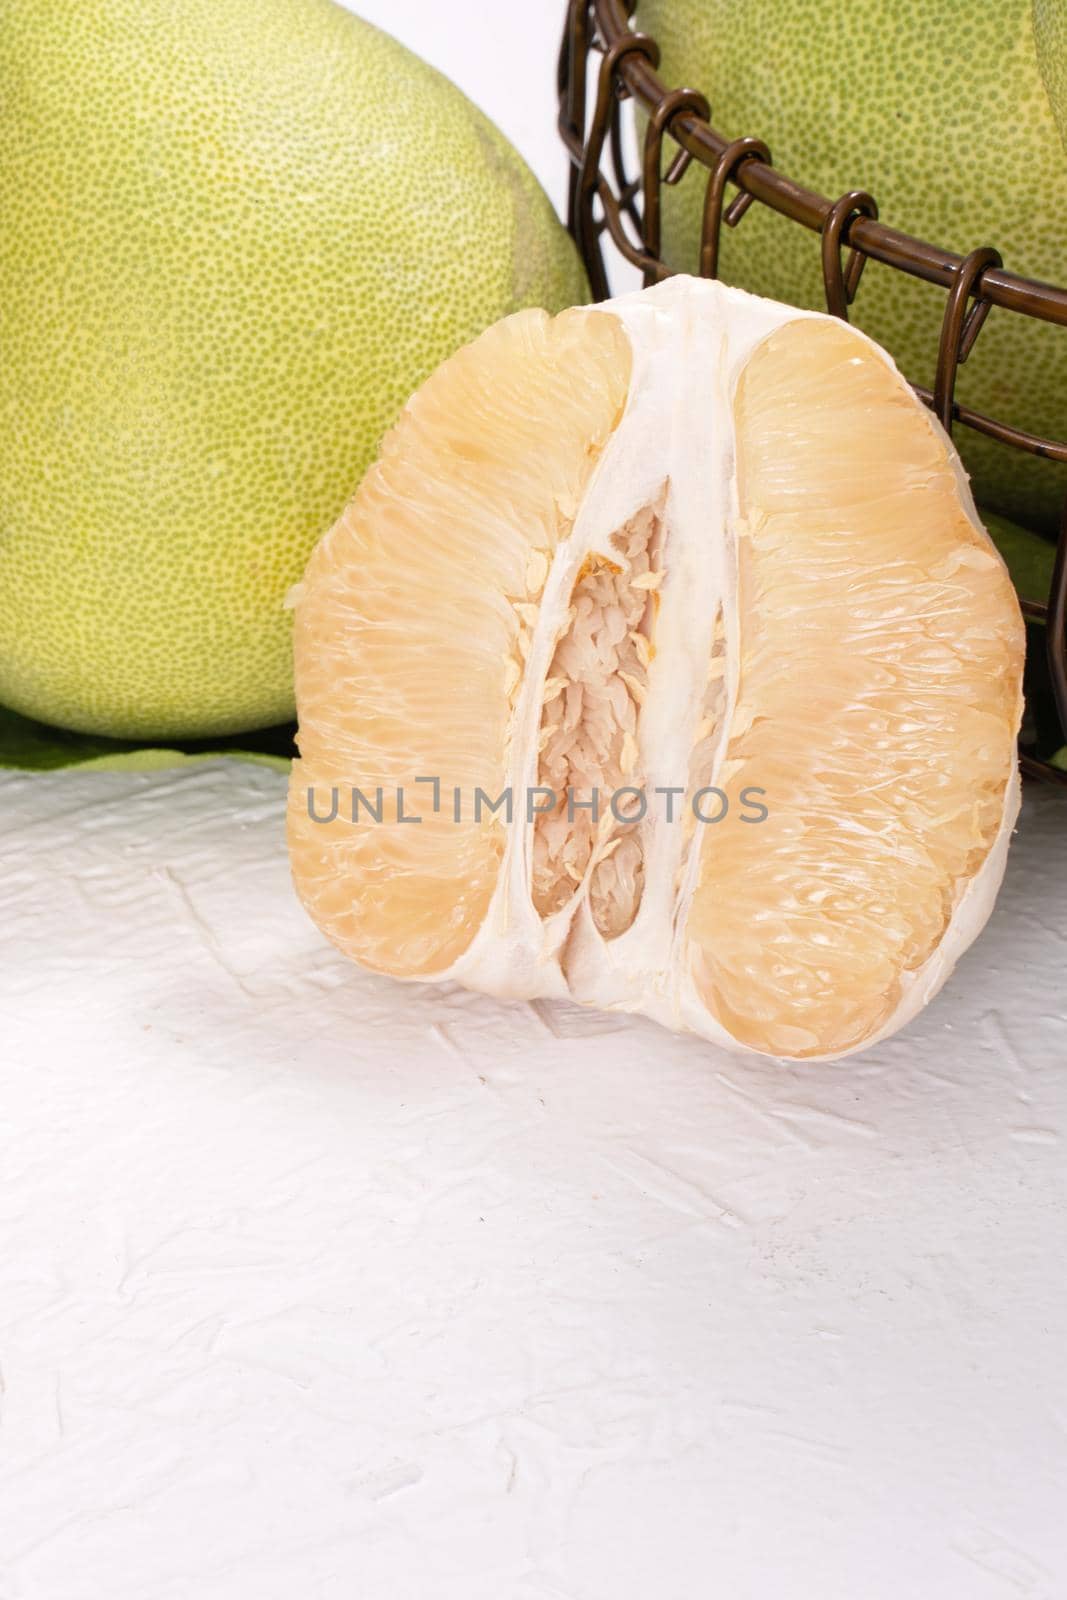 Fresh peeled pomelo, pummelo, grapefruit, shaddock on bright wooden table background. Seasonal fruit for Mid-Autumn Festival, close up, copy space. by ROMIXIMAGE